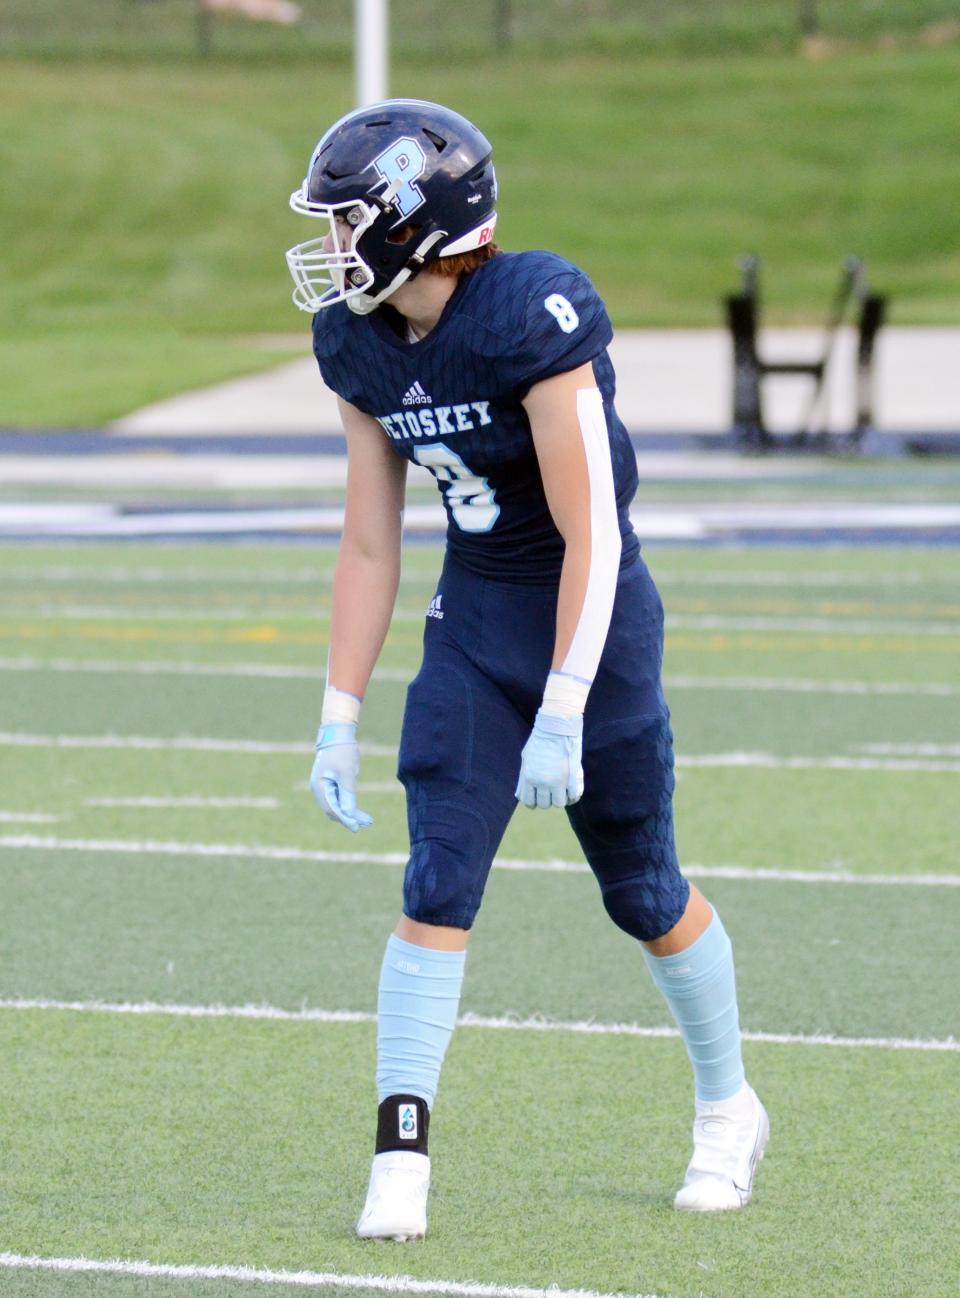 Petoskey's Seth Marek got off to a hot start to his junior season, finishing with five catches for 96 yards and three touchdowns.